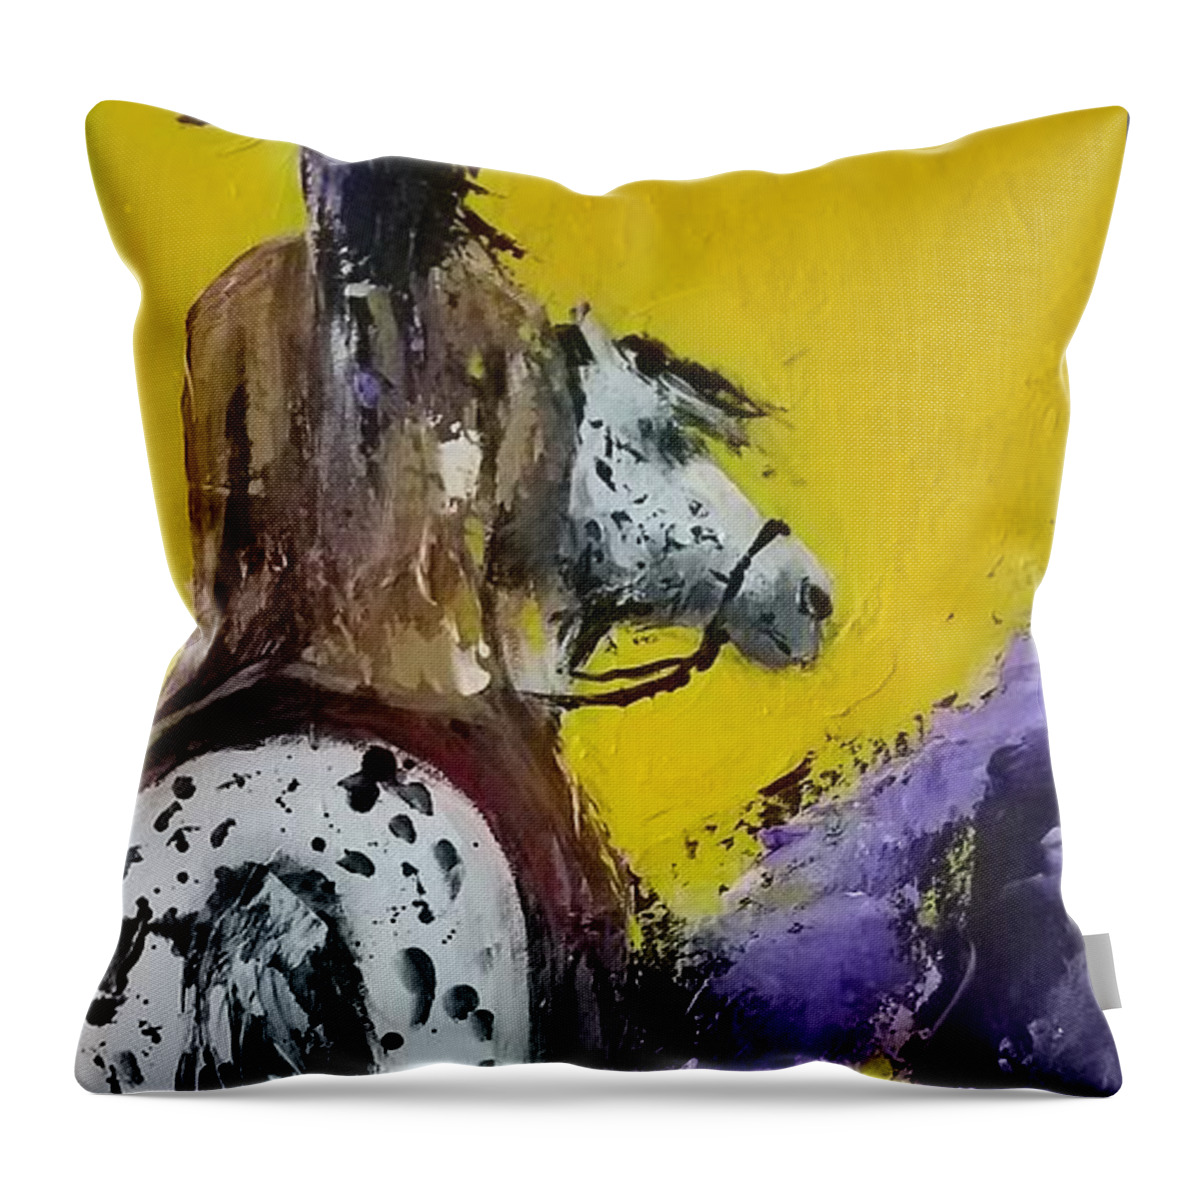  Throw Pillow featuring the painting High Places by Cher Devereaux